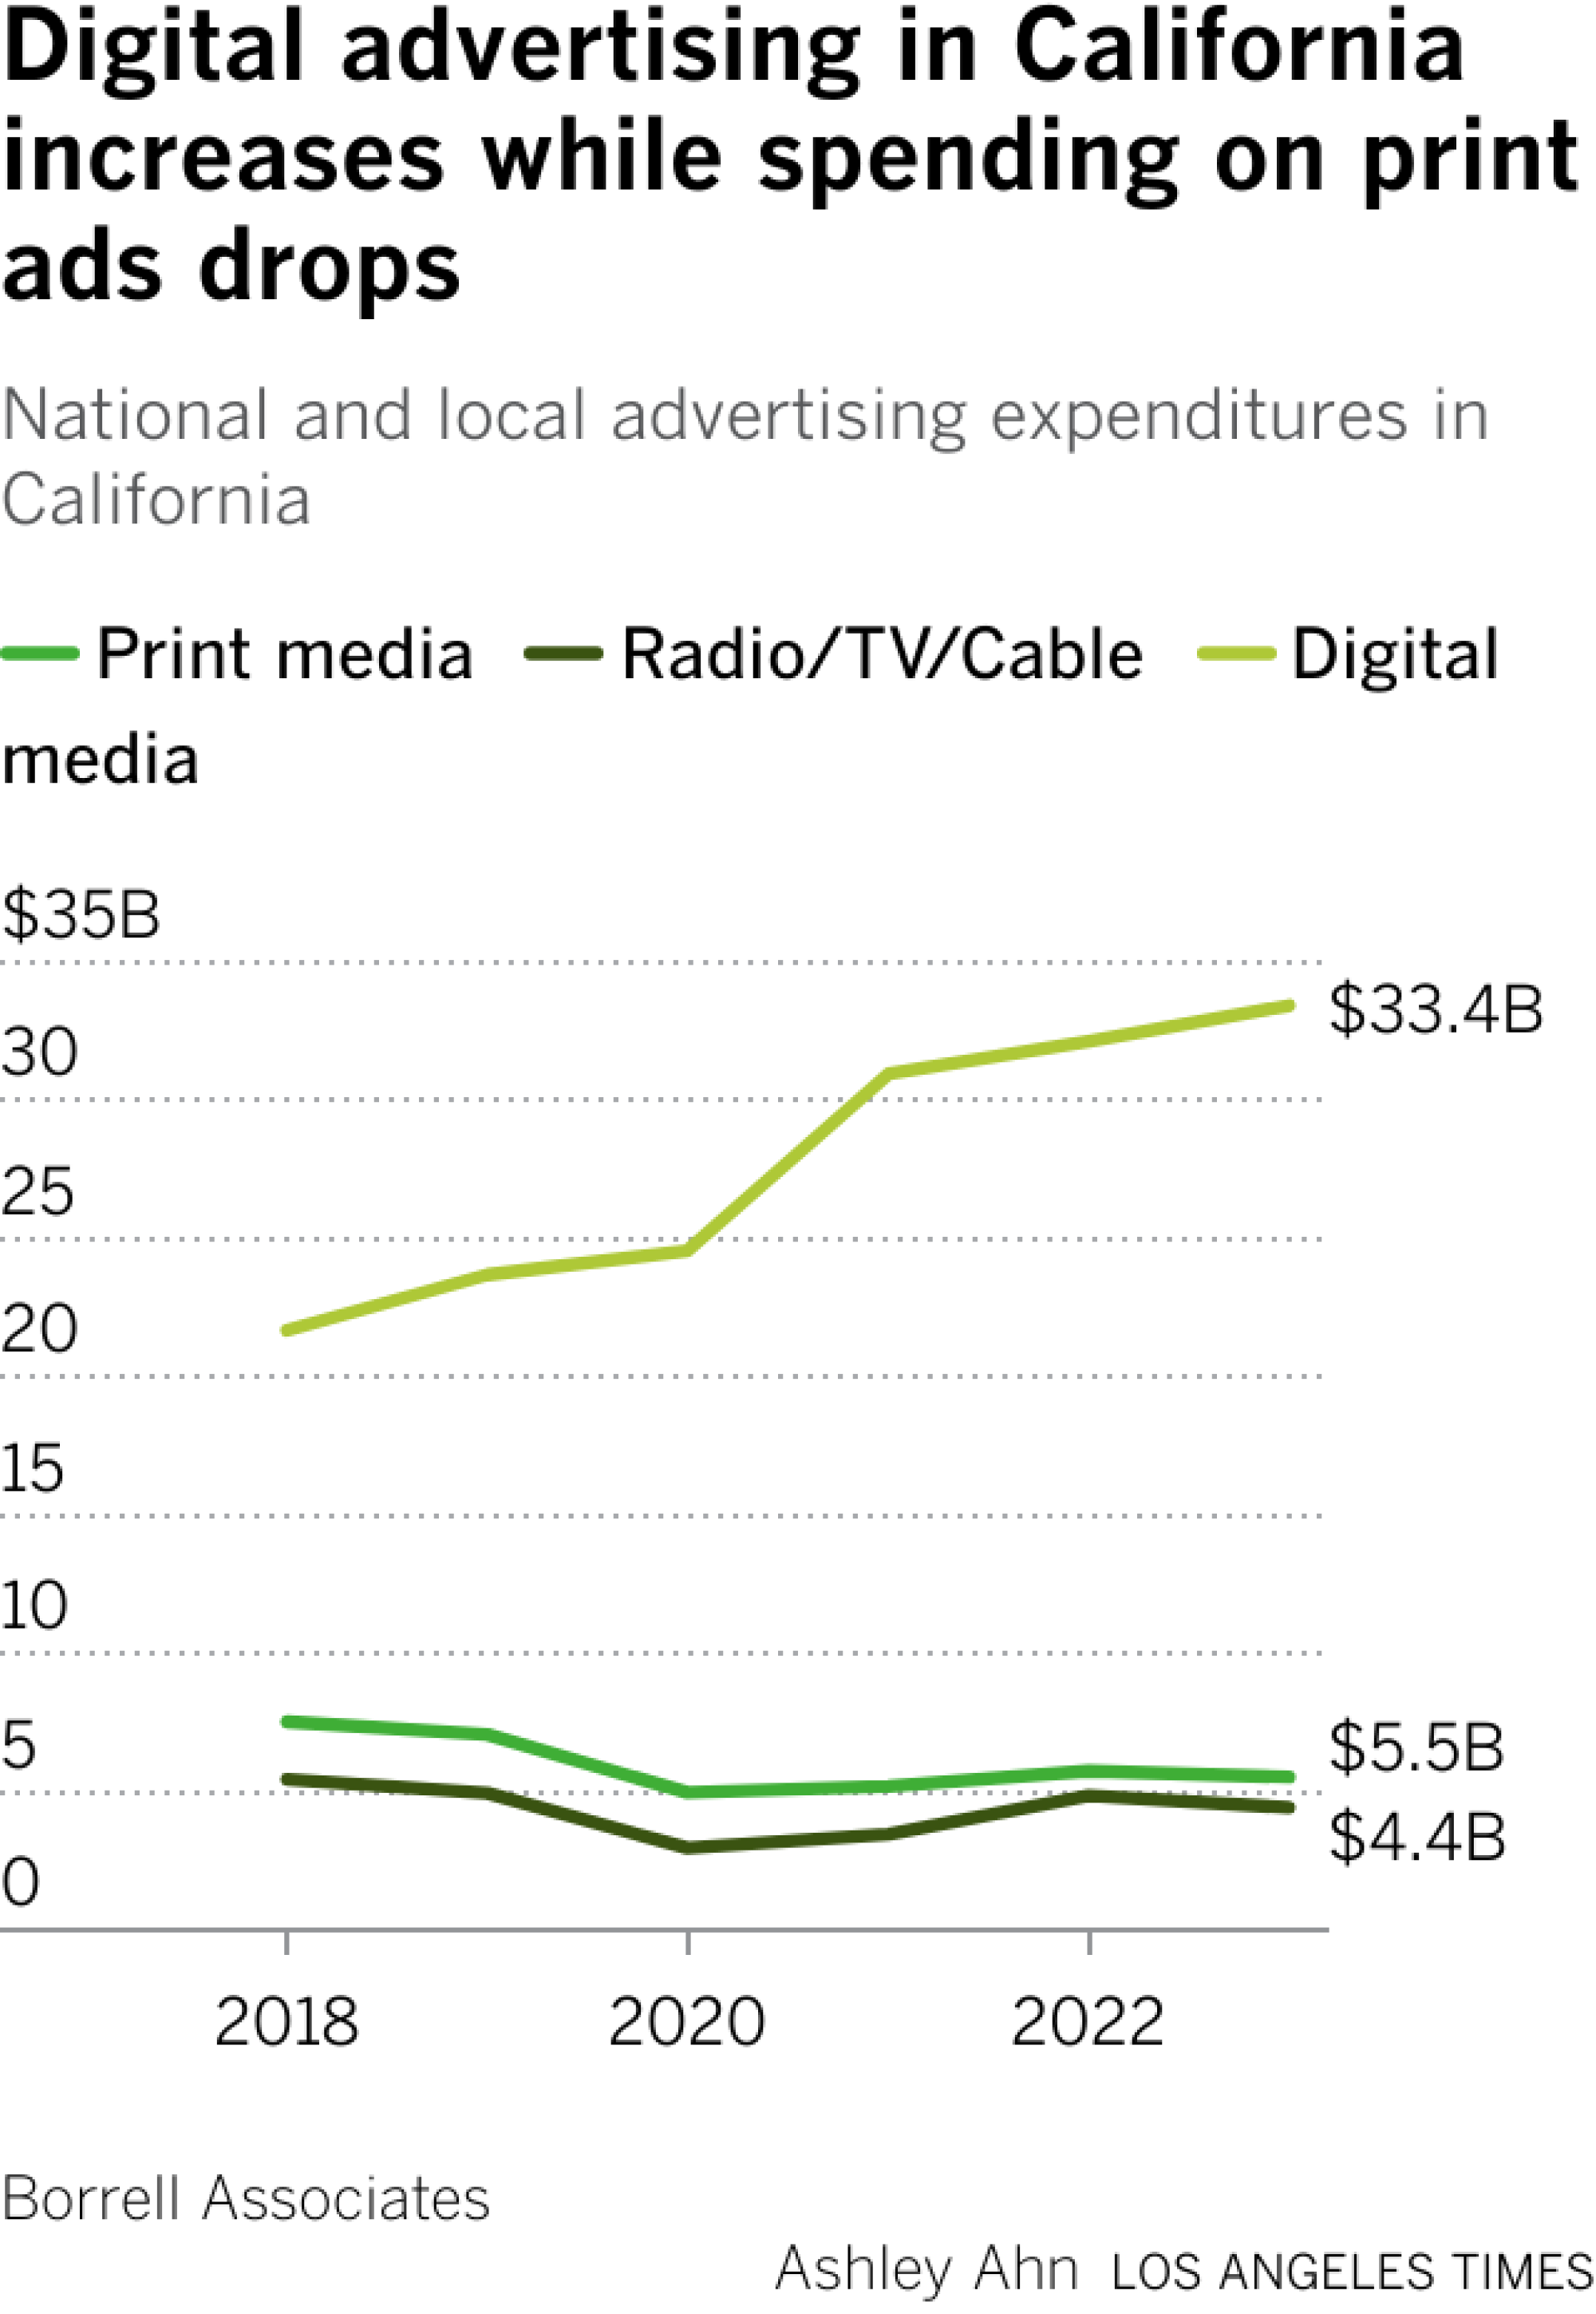 National and local advertising expenditures in California